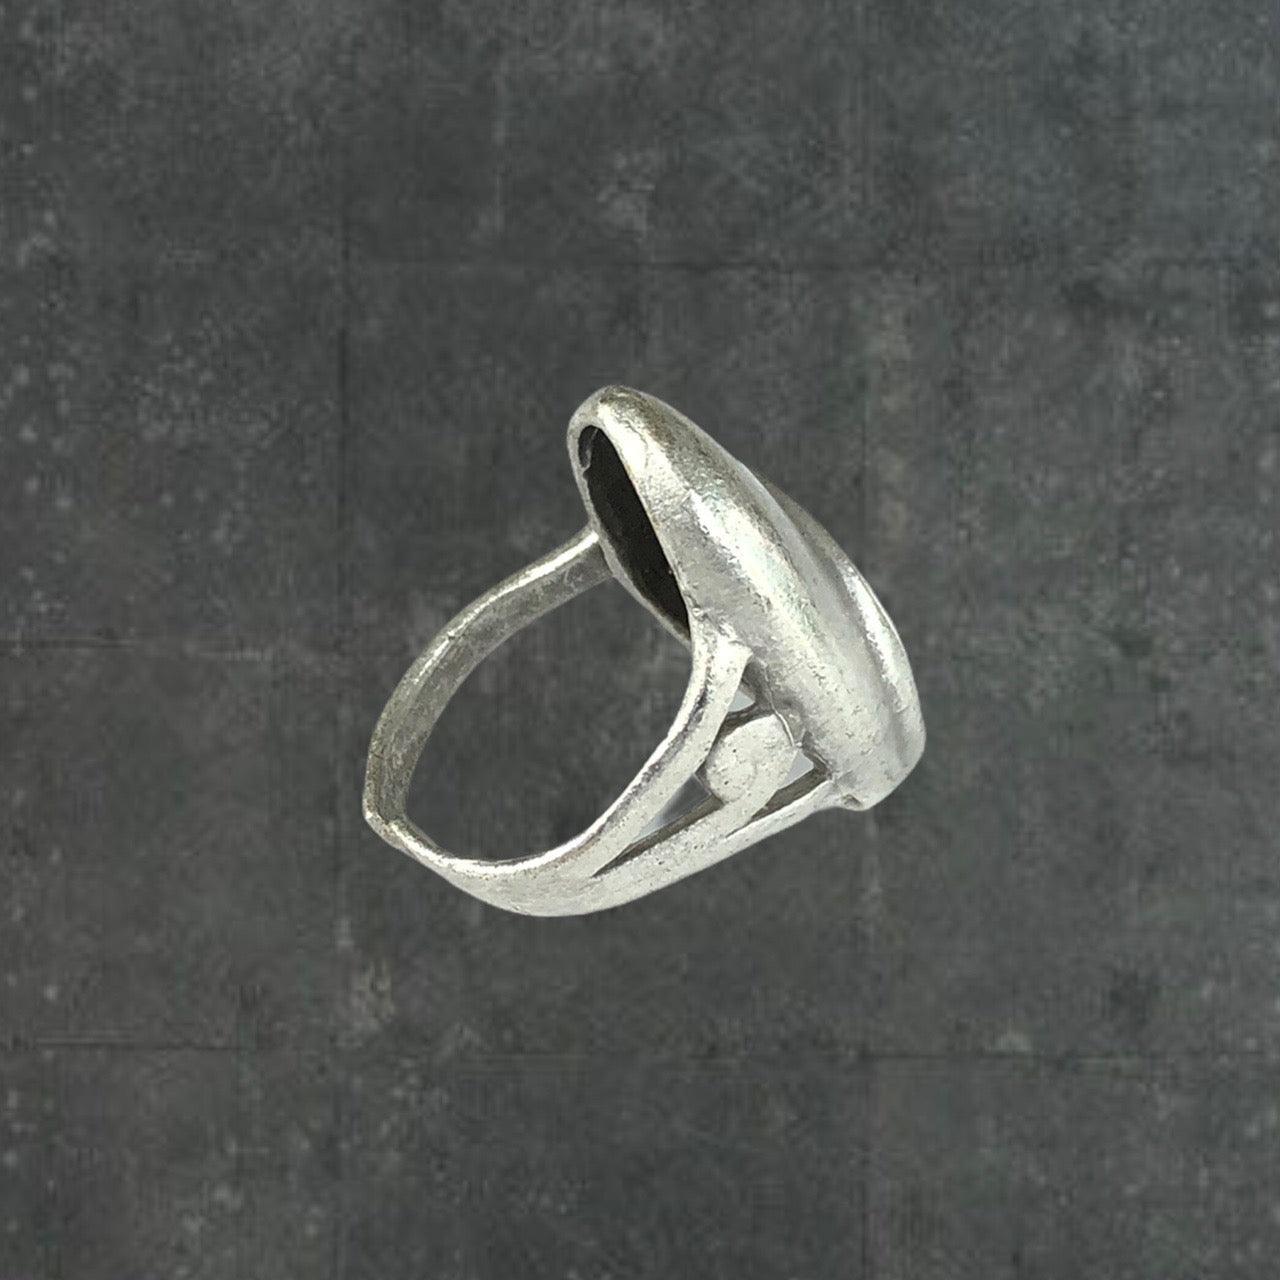 Antique Ring - Known Source